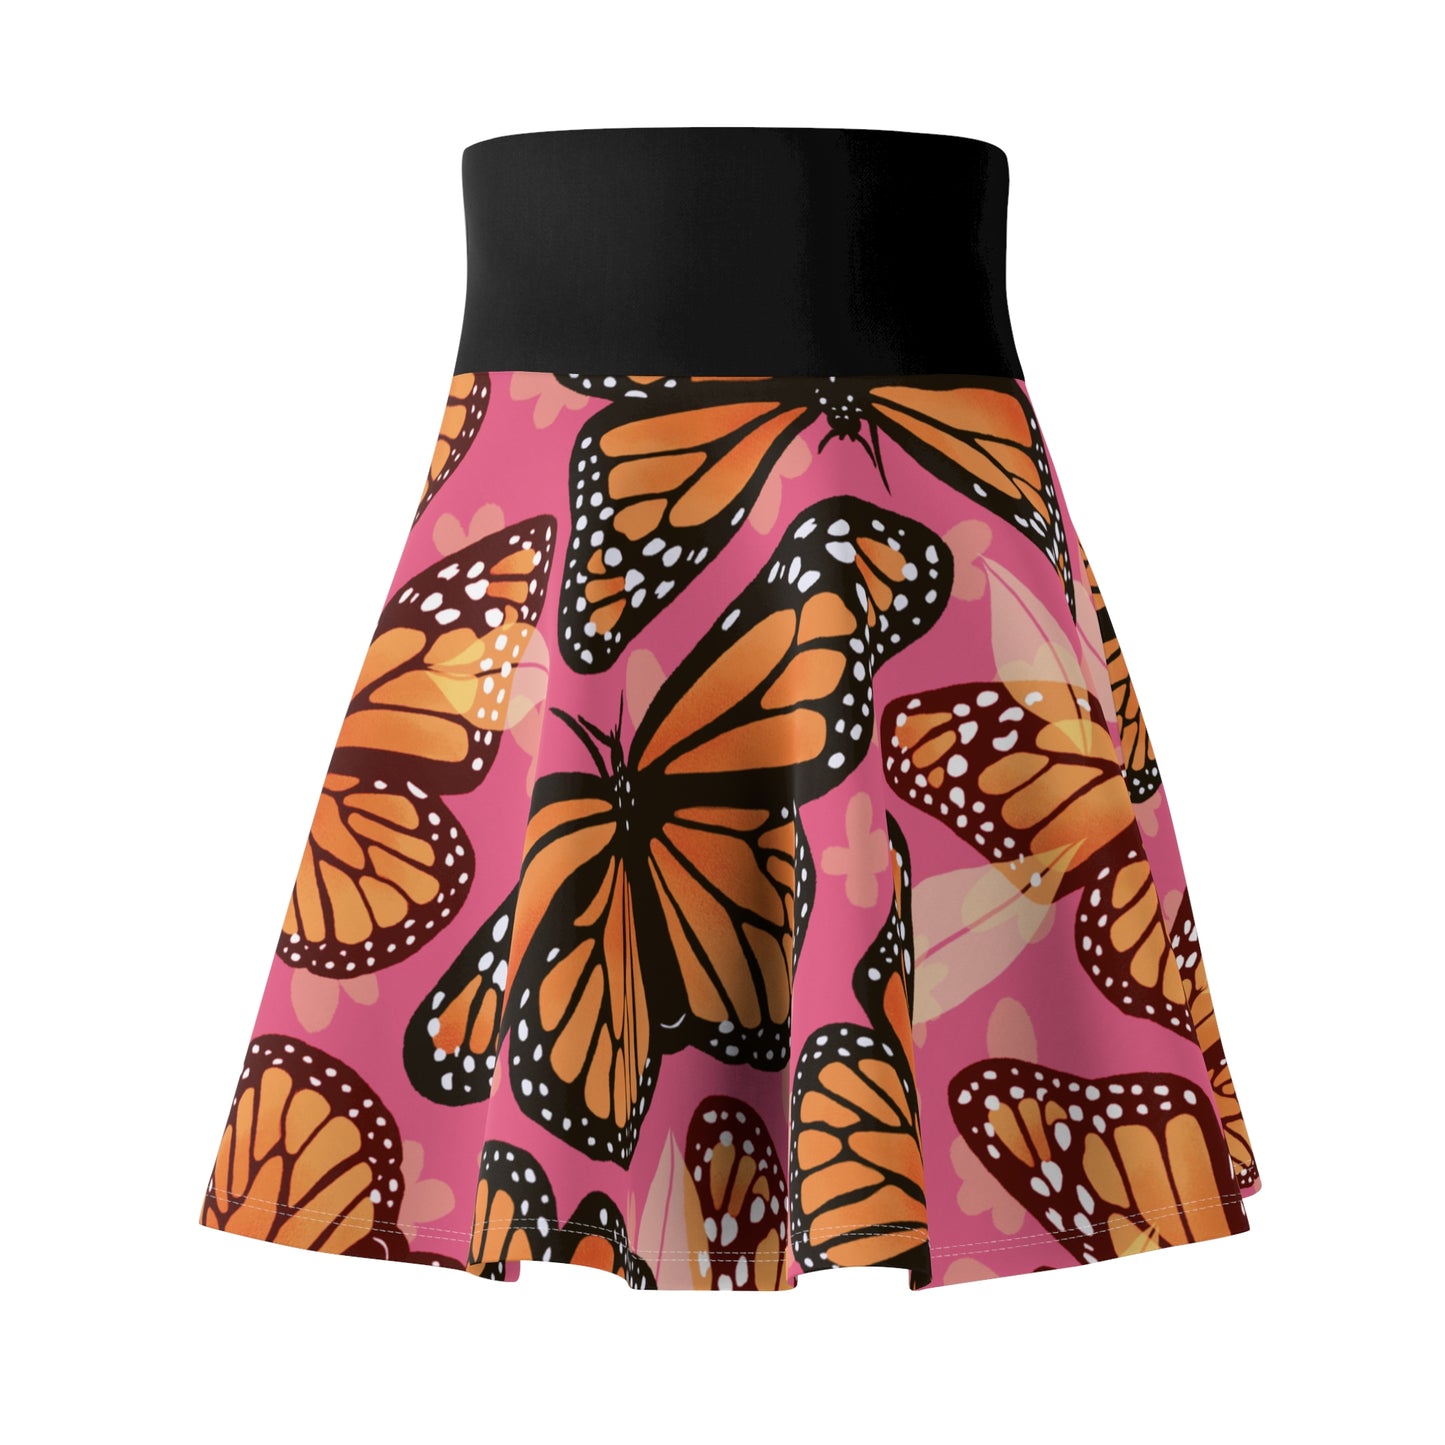 Women's Skater Skirt, butterfly pattern, versatile fit AOP skater skirt with a cozy, soft touch and a casual look,